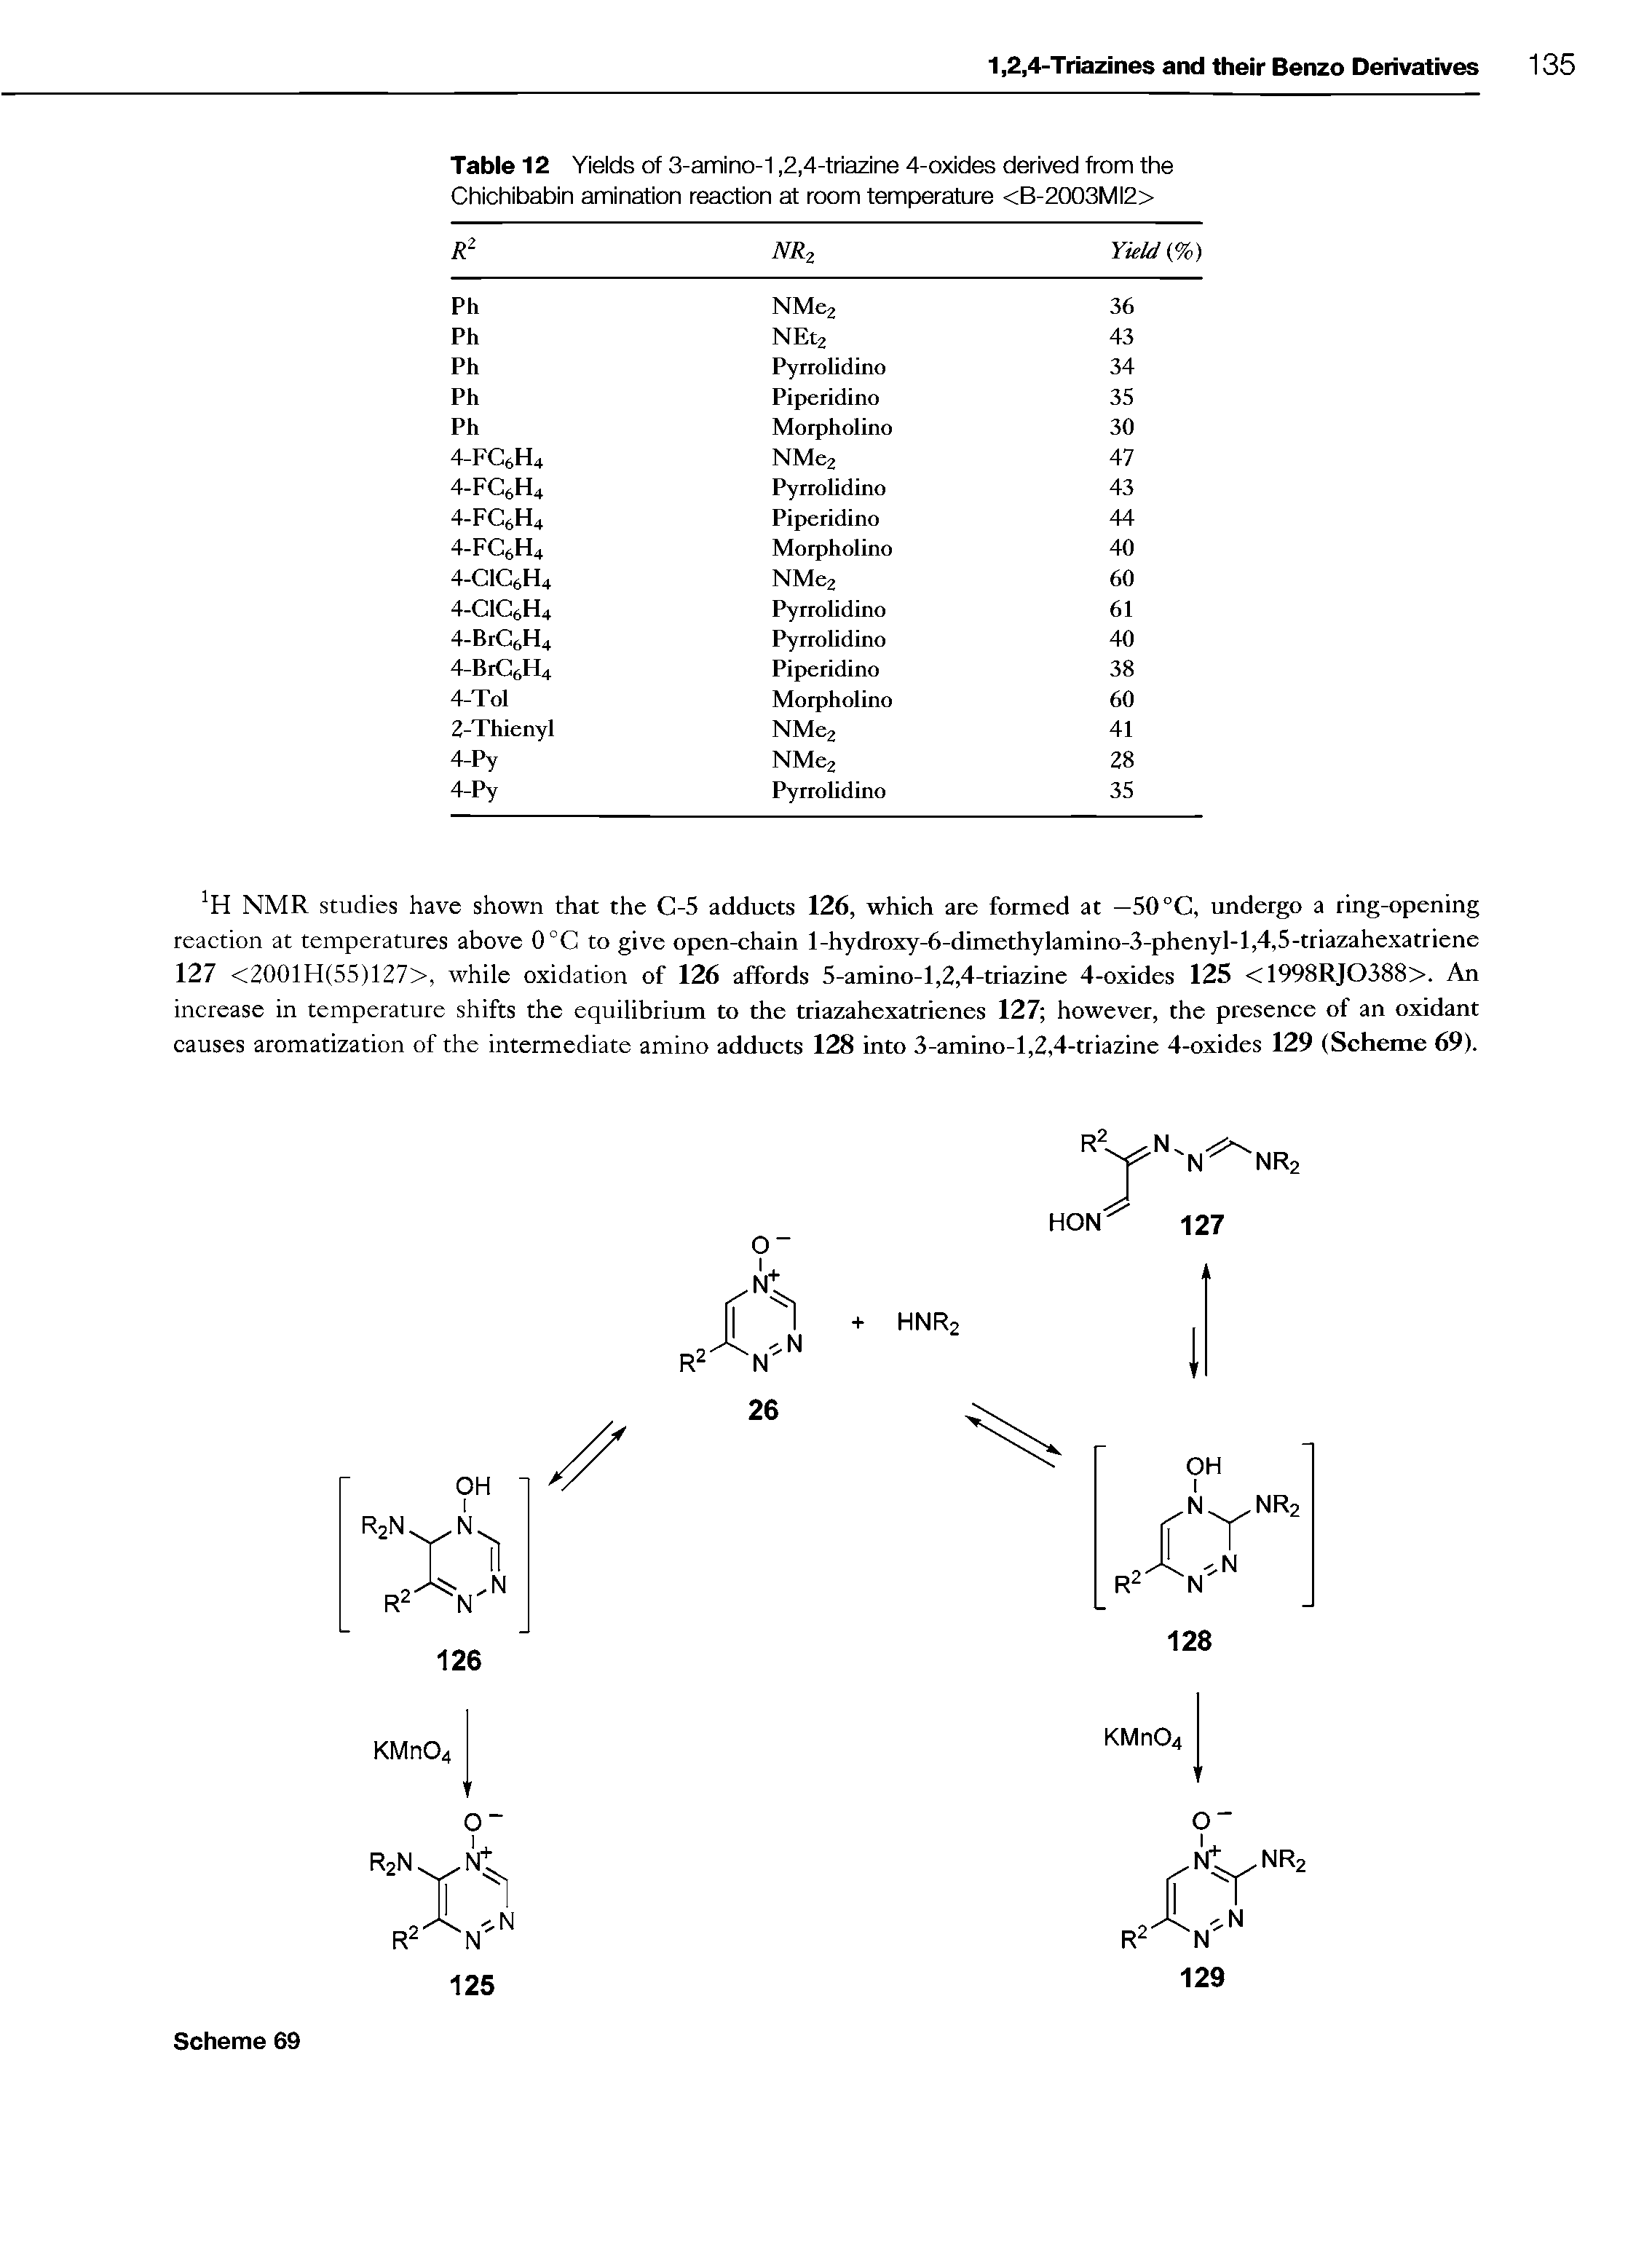 Table 12 Yields of 3-amino-1,2,4-triazine 4-oxides derived from the Chichibabin amination reaction at room temperature <B-2003MI2>...